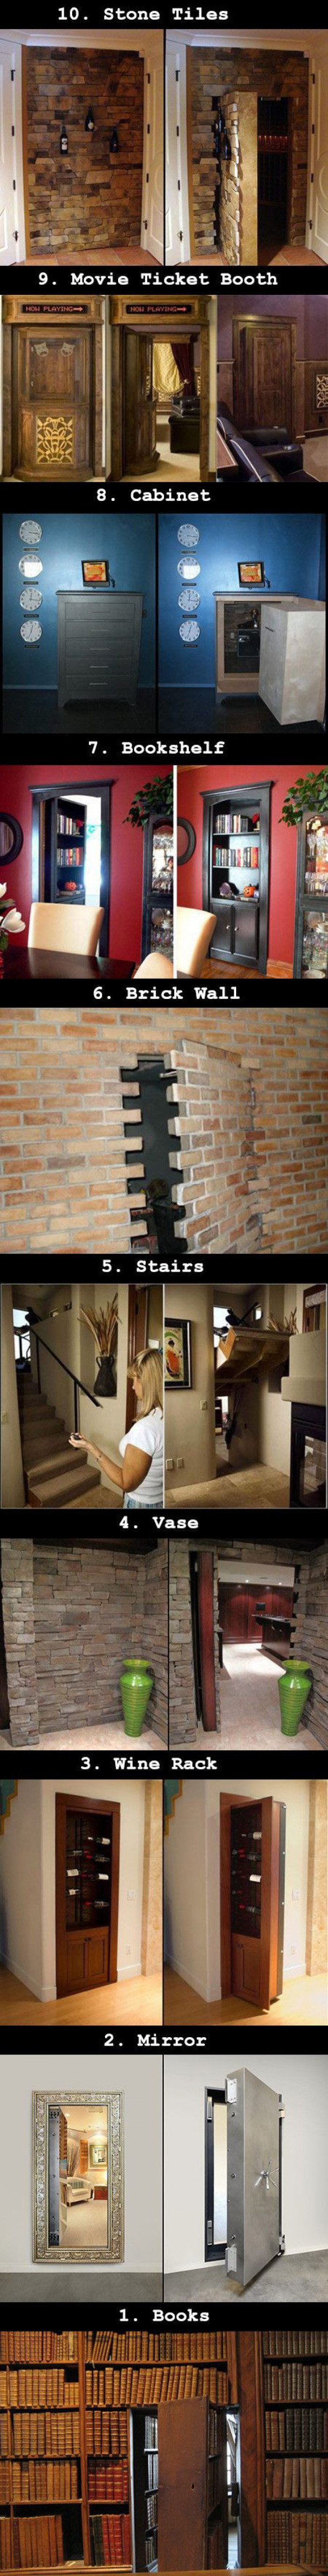 10 Awesome Secret Doors You Will Want In Your House